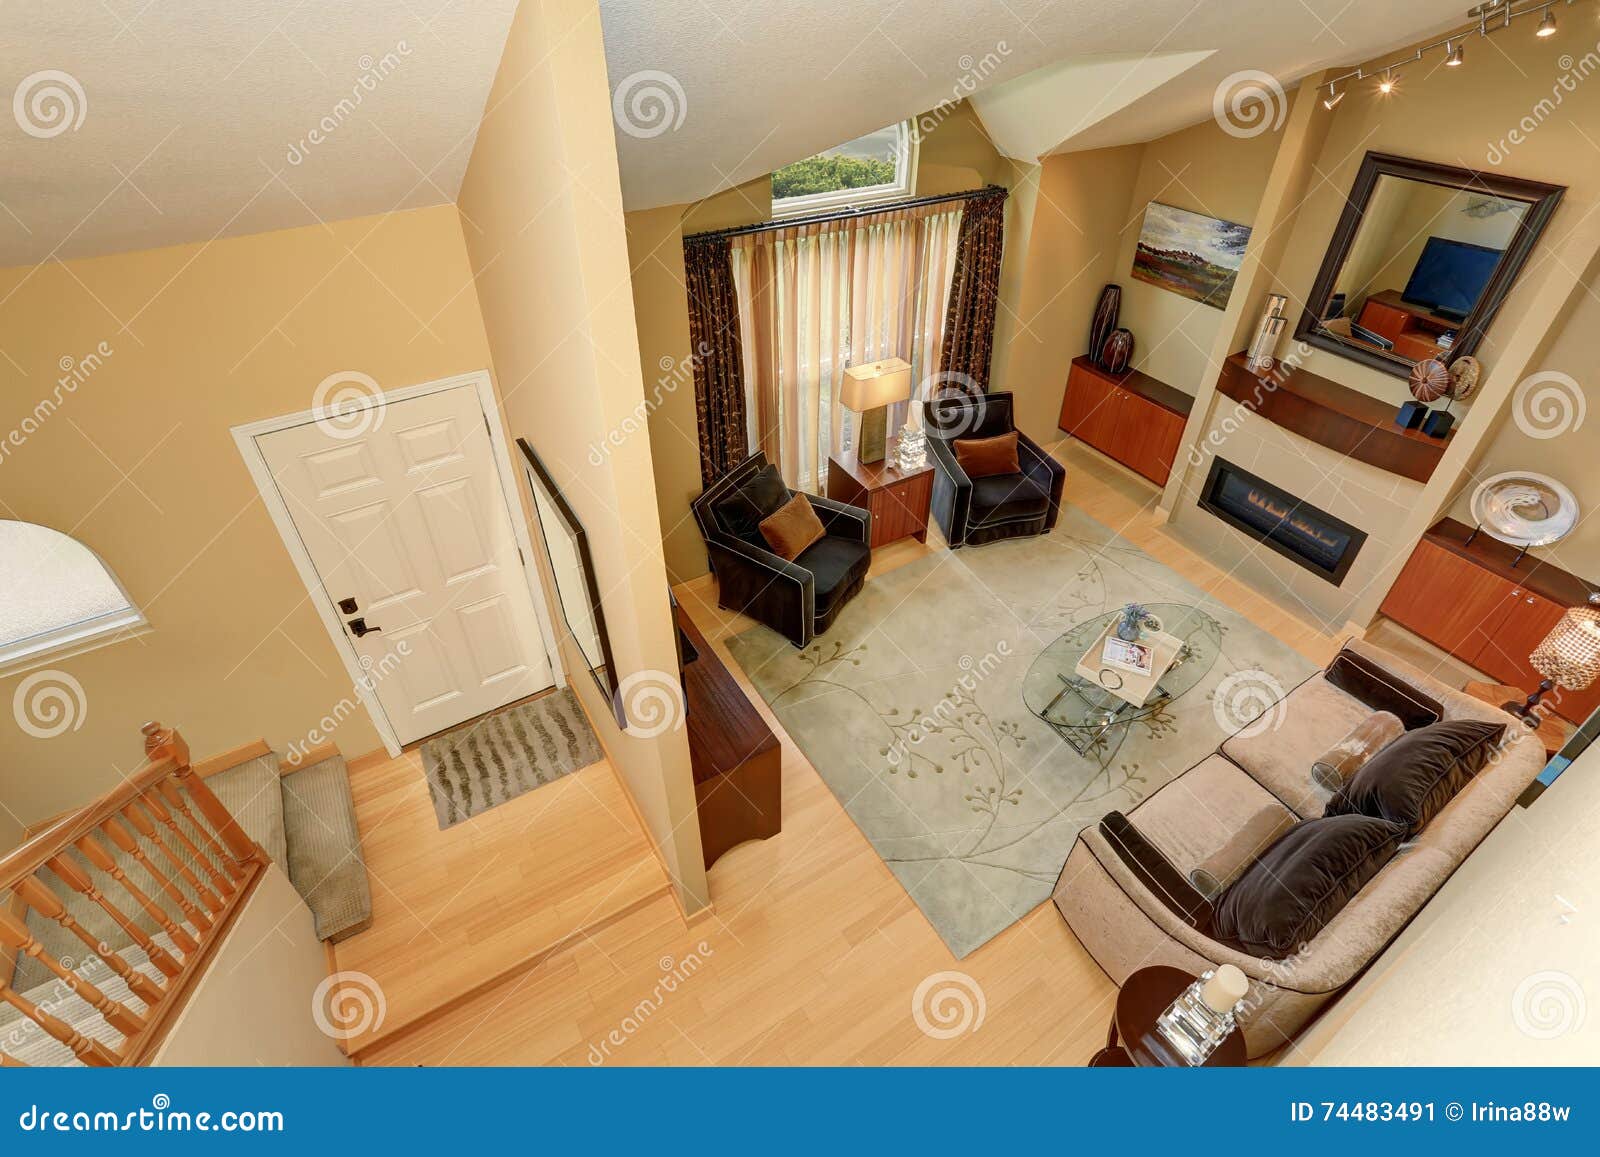 Panoramic View Of Elegant Living Room And Entryway From Upstairs